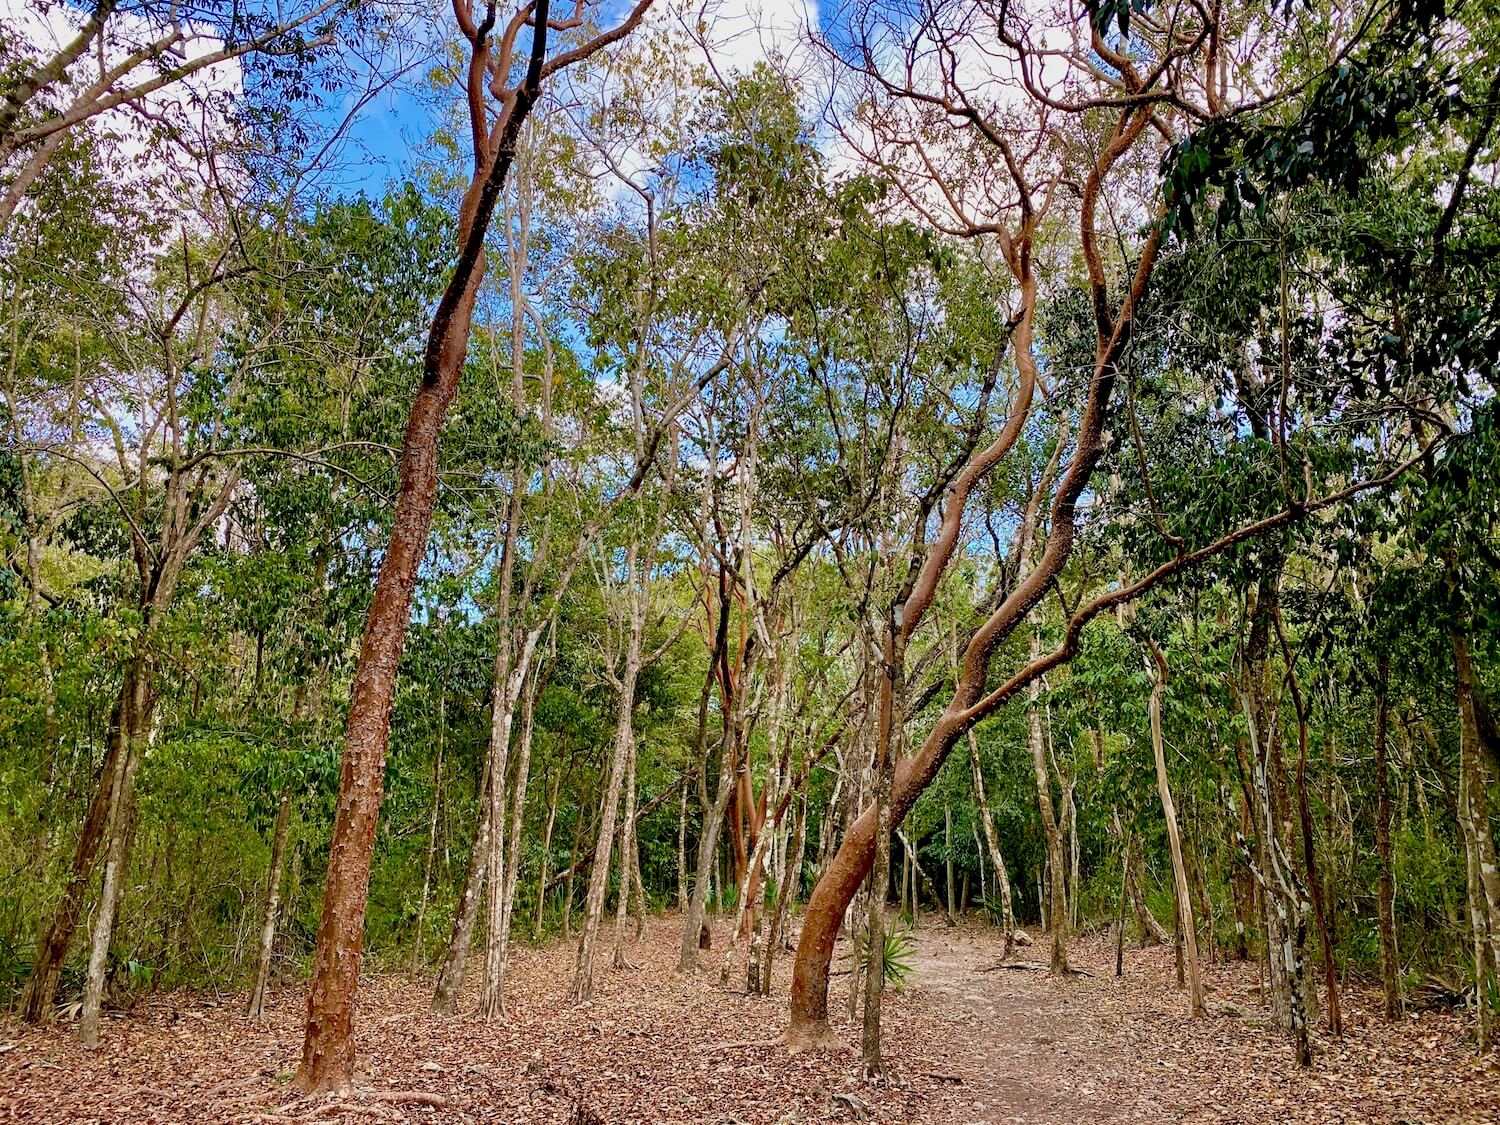 Deep within the jungle of Coba, on Mexico's Yucatan Peninsula. The jungle trees have reddish brown bark and tangle within the forest amongst blue skies in the background and a very dry, leafy forest floor with a make shift path worn into a narrow area.